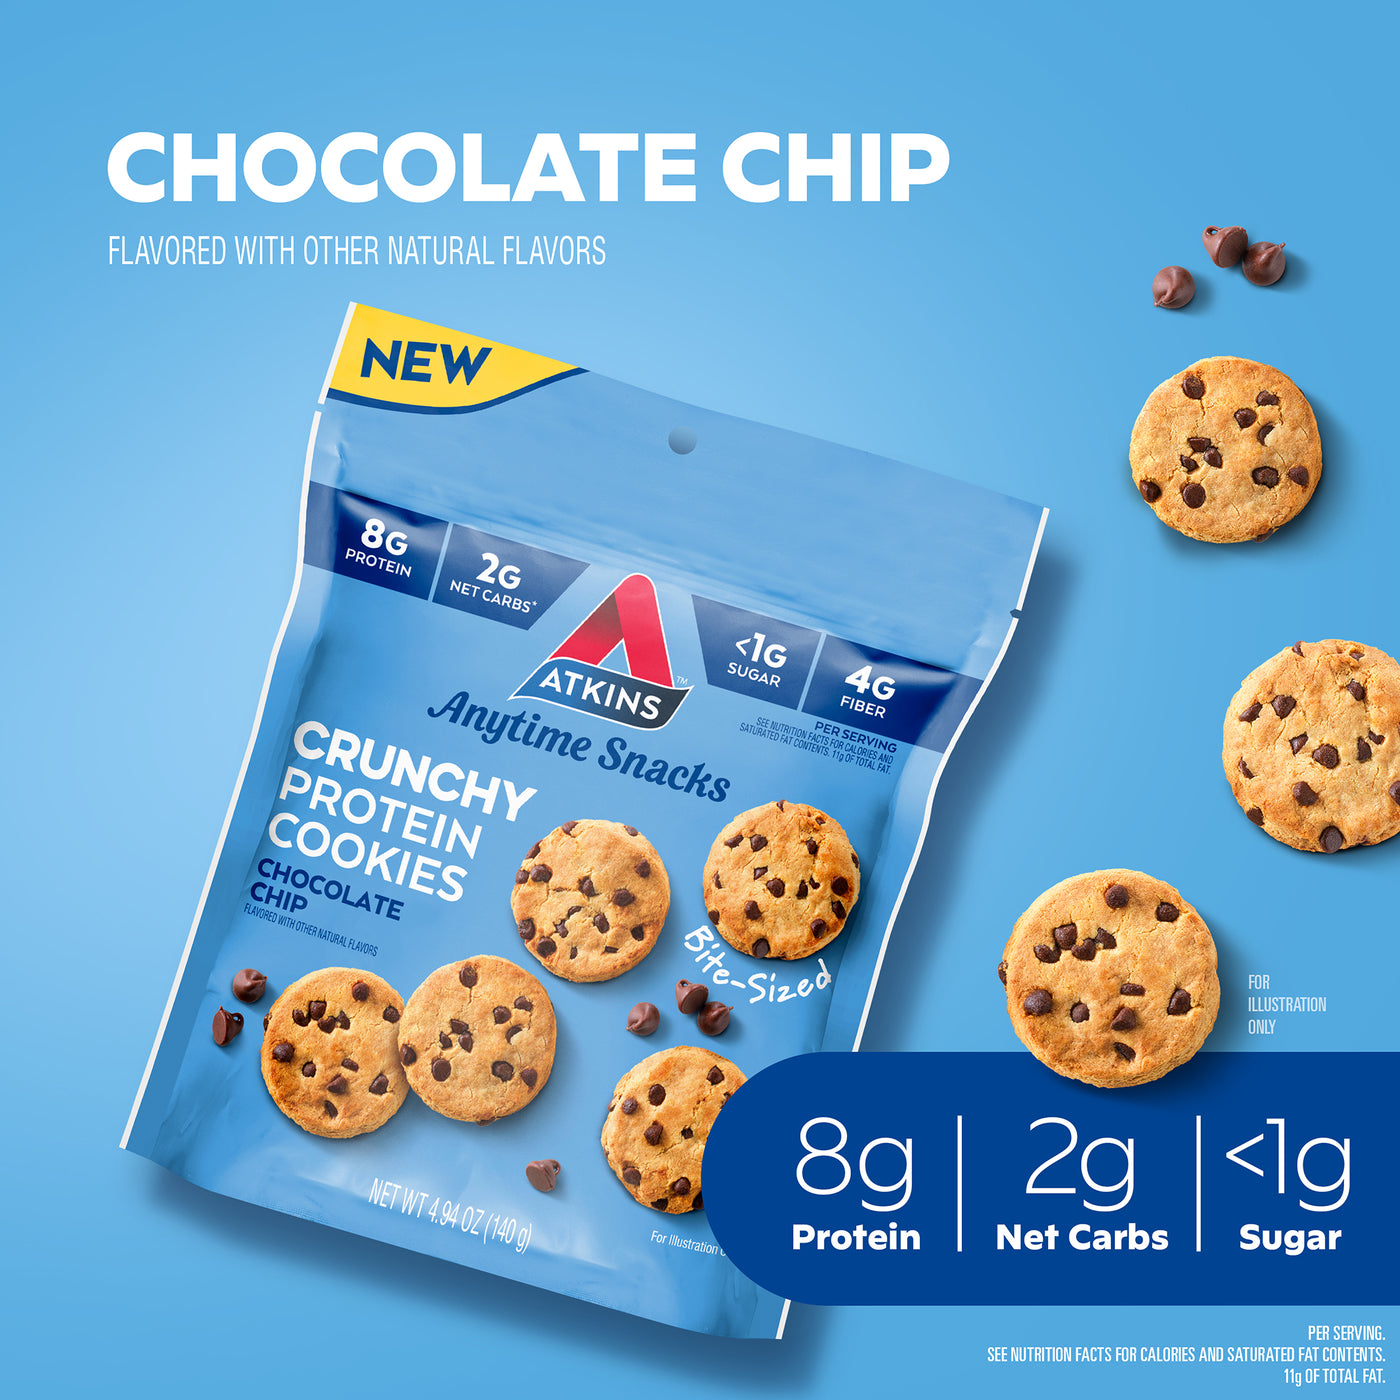 Chocolate Chip Bite-Sized Crunchy Protein Cookies; Naturally flavored with other natural flavors,  8g Protein, 2g Net Carbs, <1g Sugar. Per Serving. See Nutrition Facts for Calories and Saturated at Contents, 11g of Total Fat. For Illustration Only. Showing cookies details with chocolate chips.